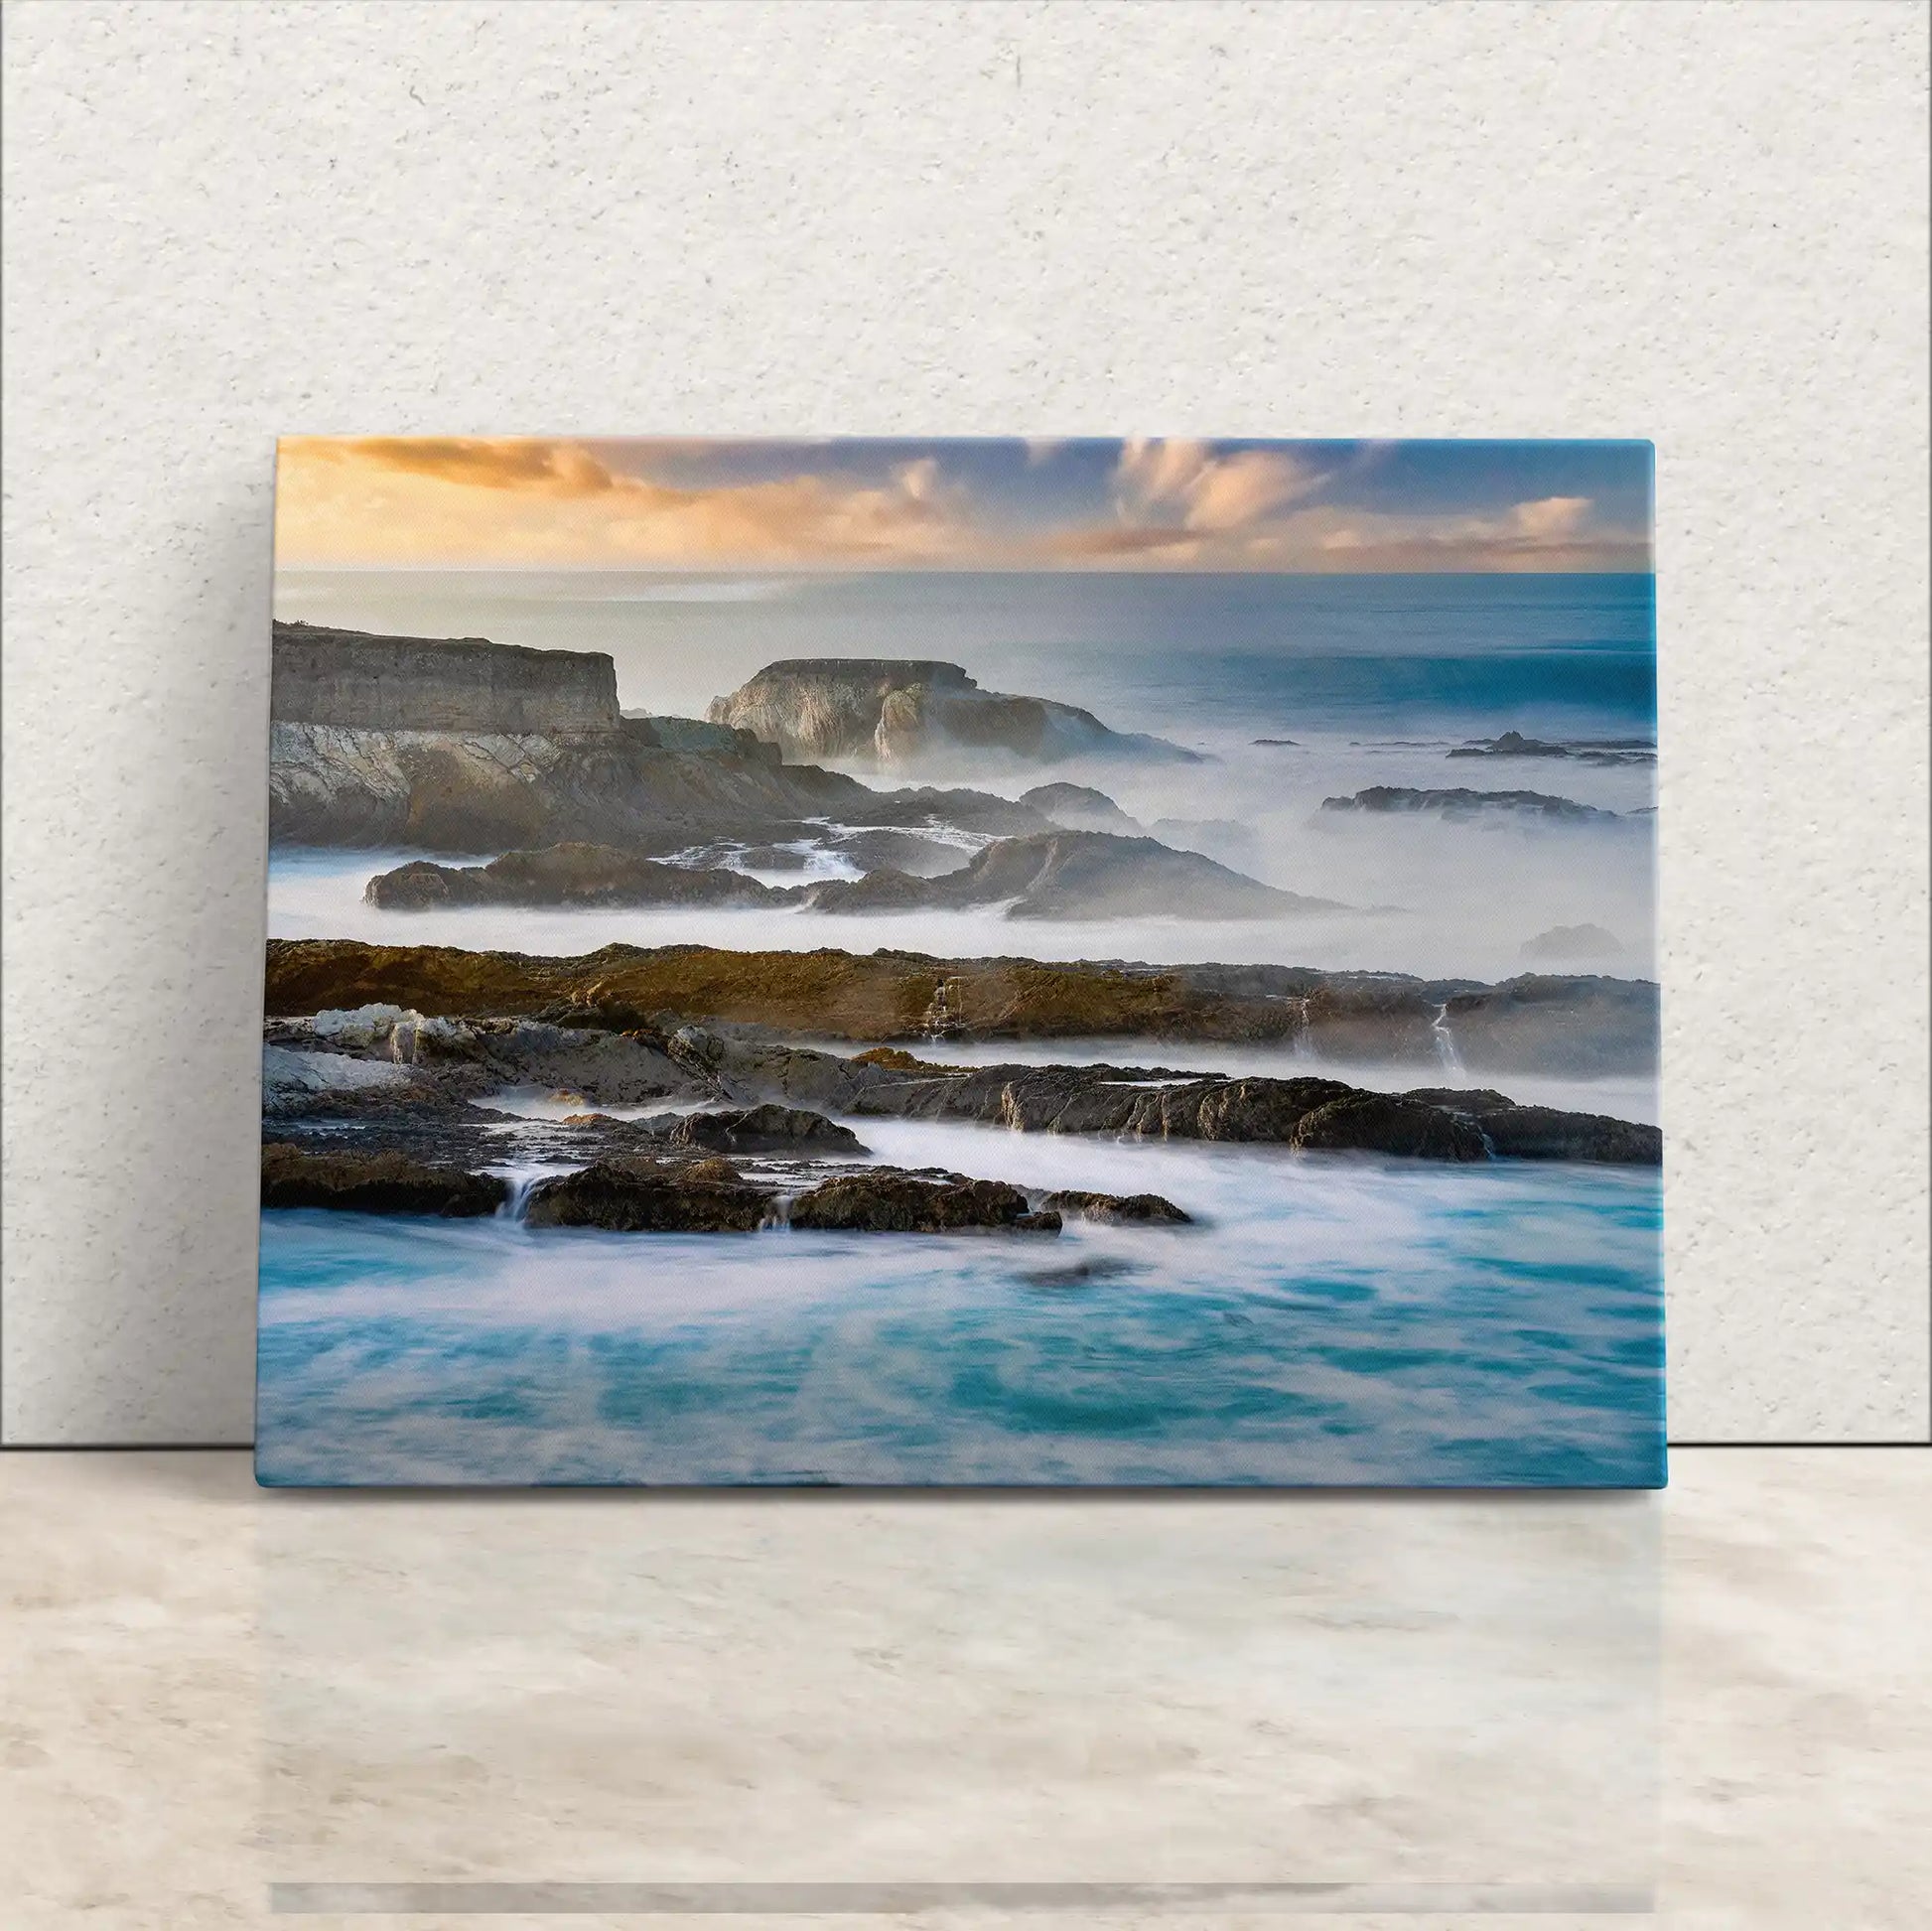 Elegant canvas print leaning against a white wall, depicting the serene California Pacific coastline with its dramatic cliffs and misty ocean waves.